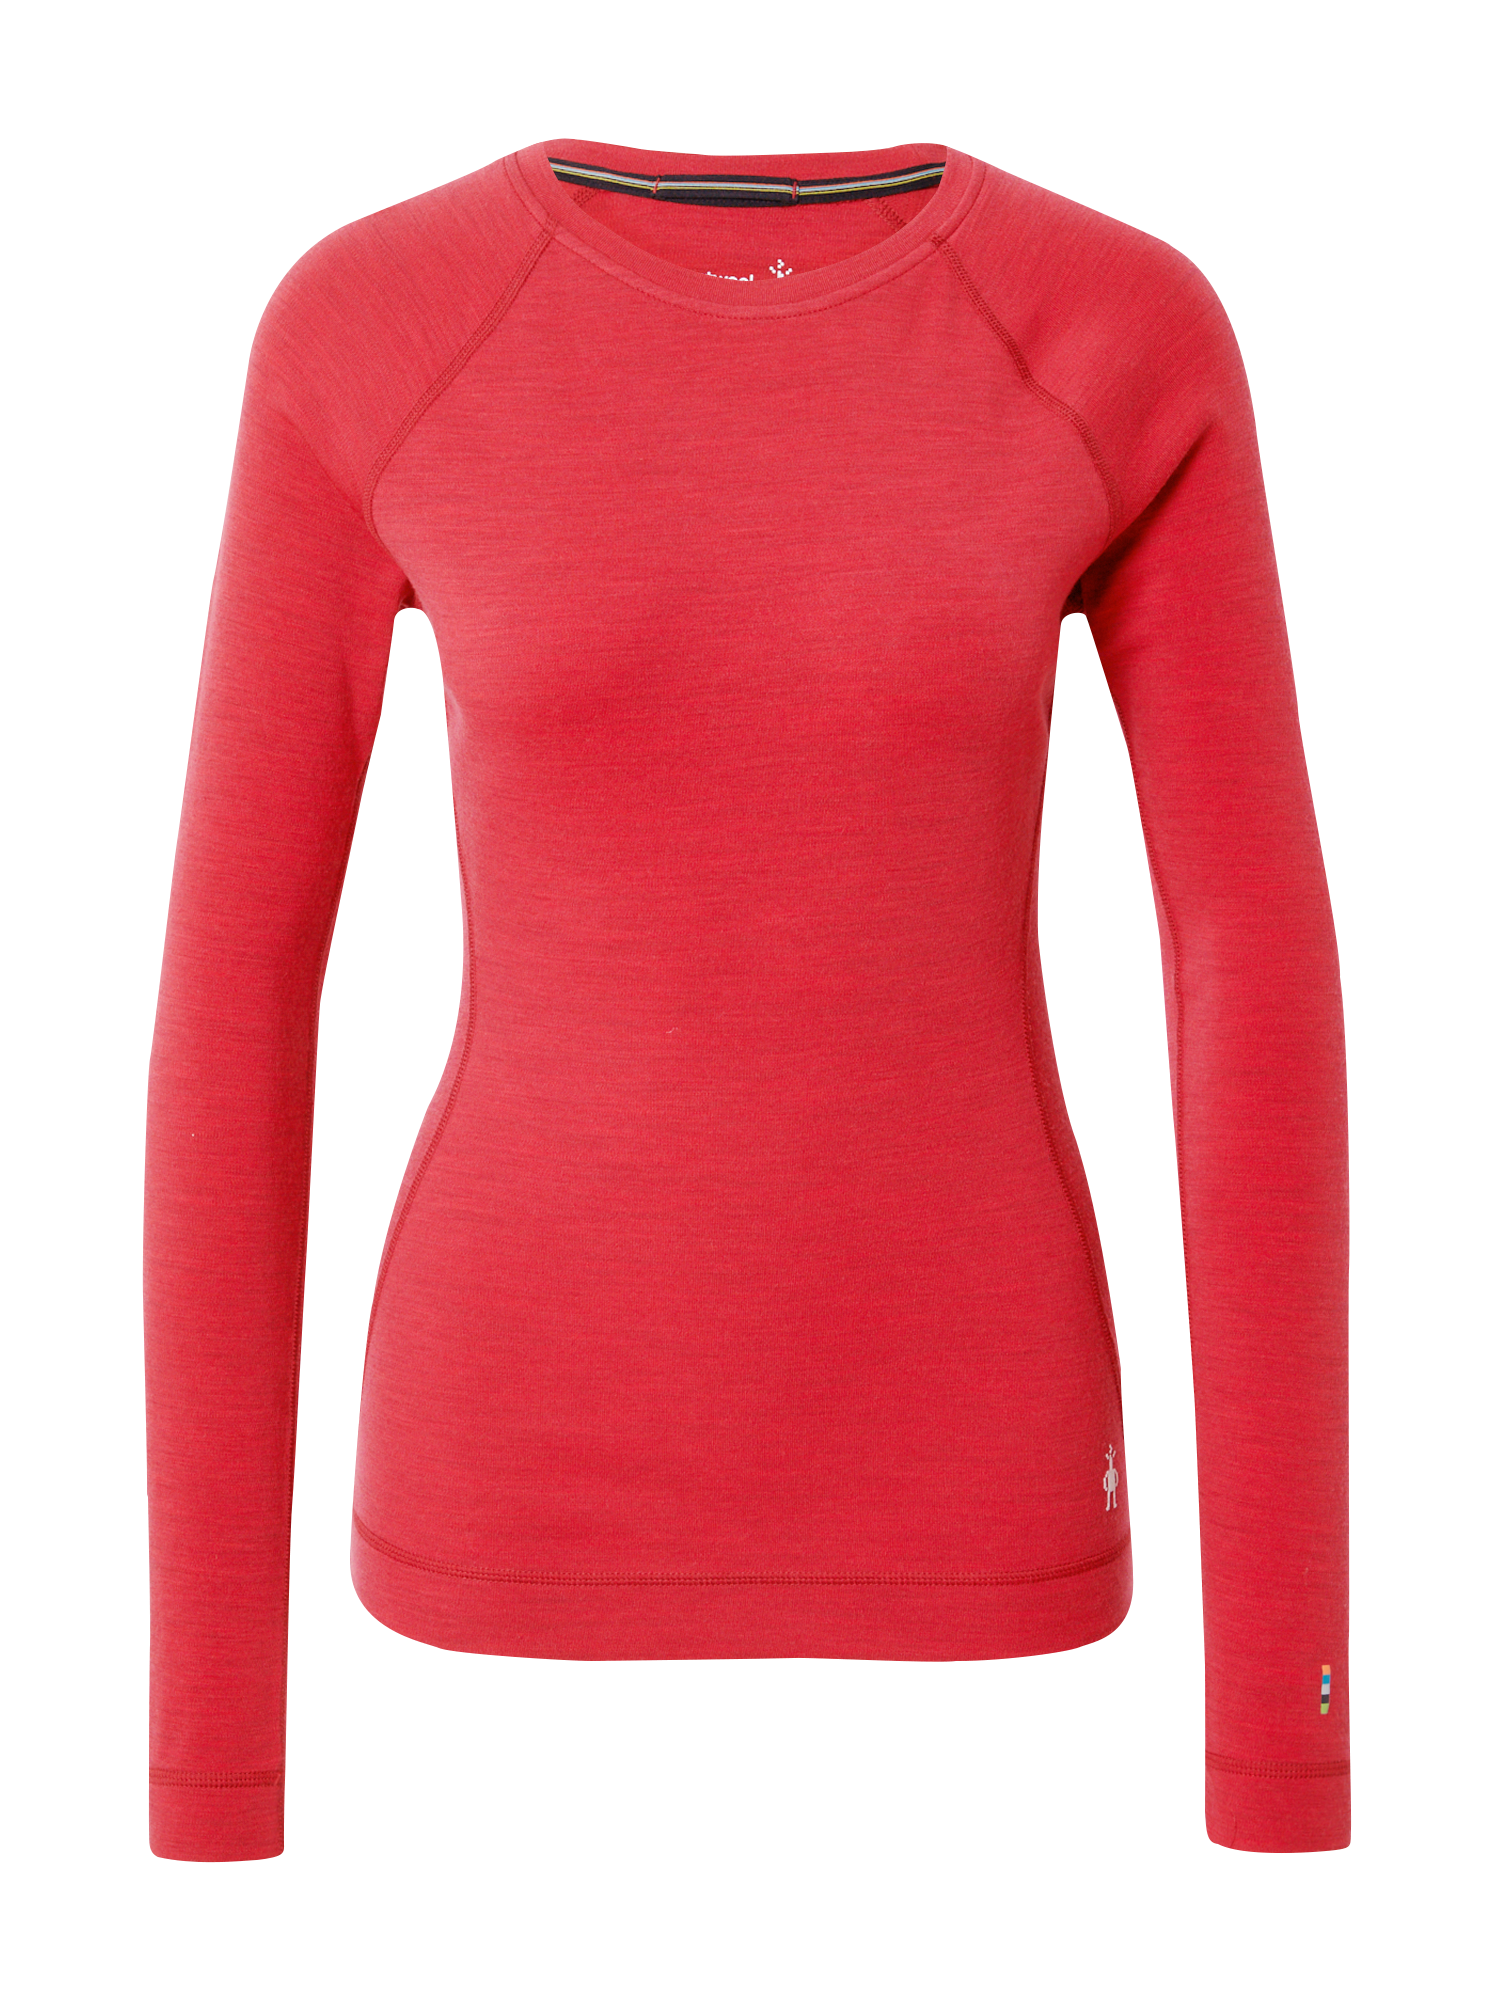 Smartwool Base layer in Rosso 